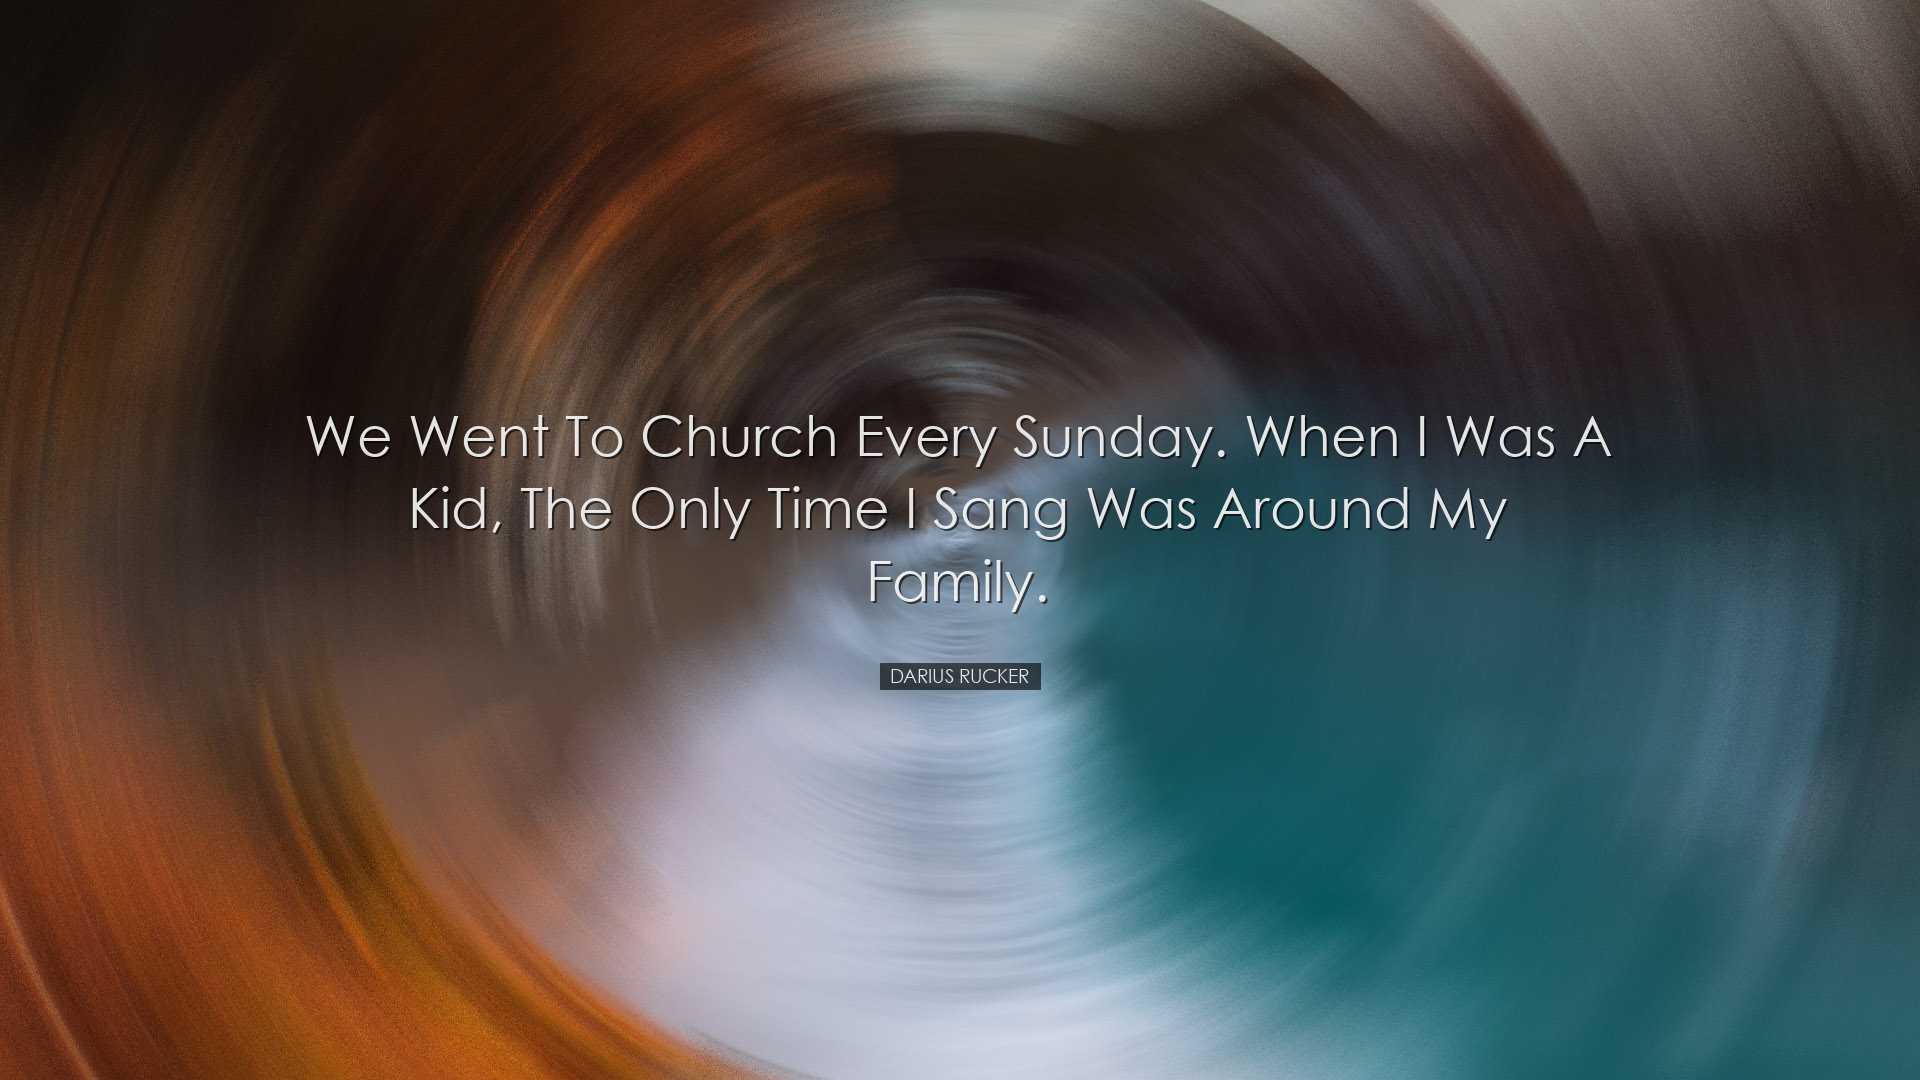 We went to church every Sunday. When I was a kid, the only time I